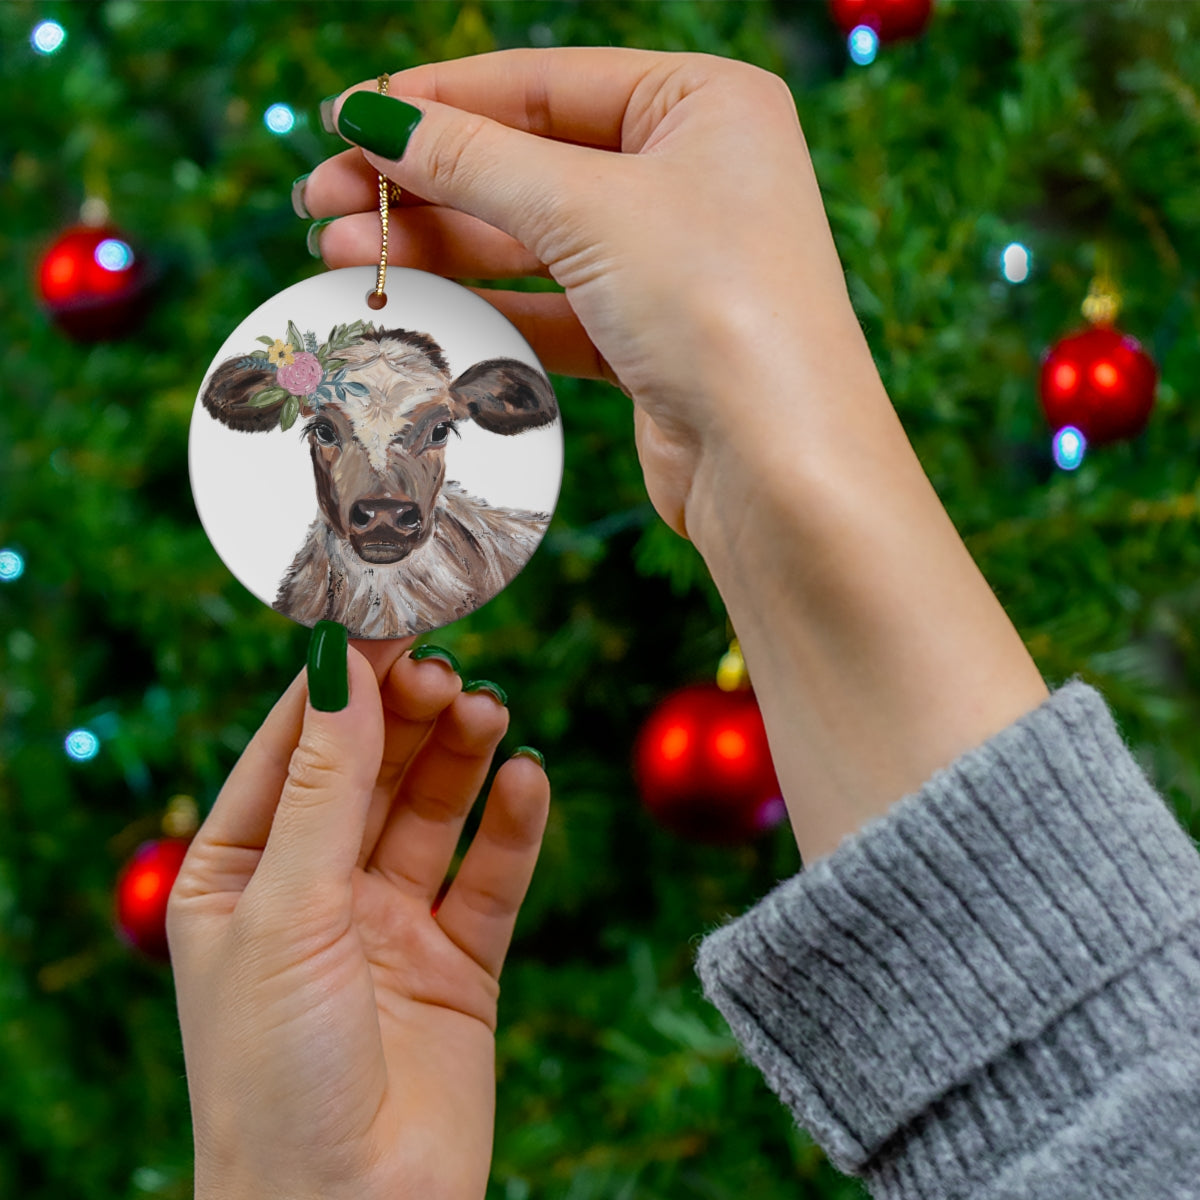 Ruthie Cow Personalized Ceramic Ornaments